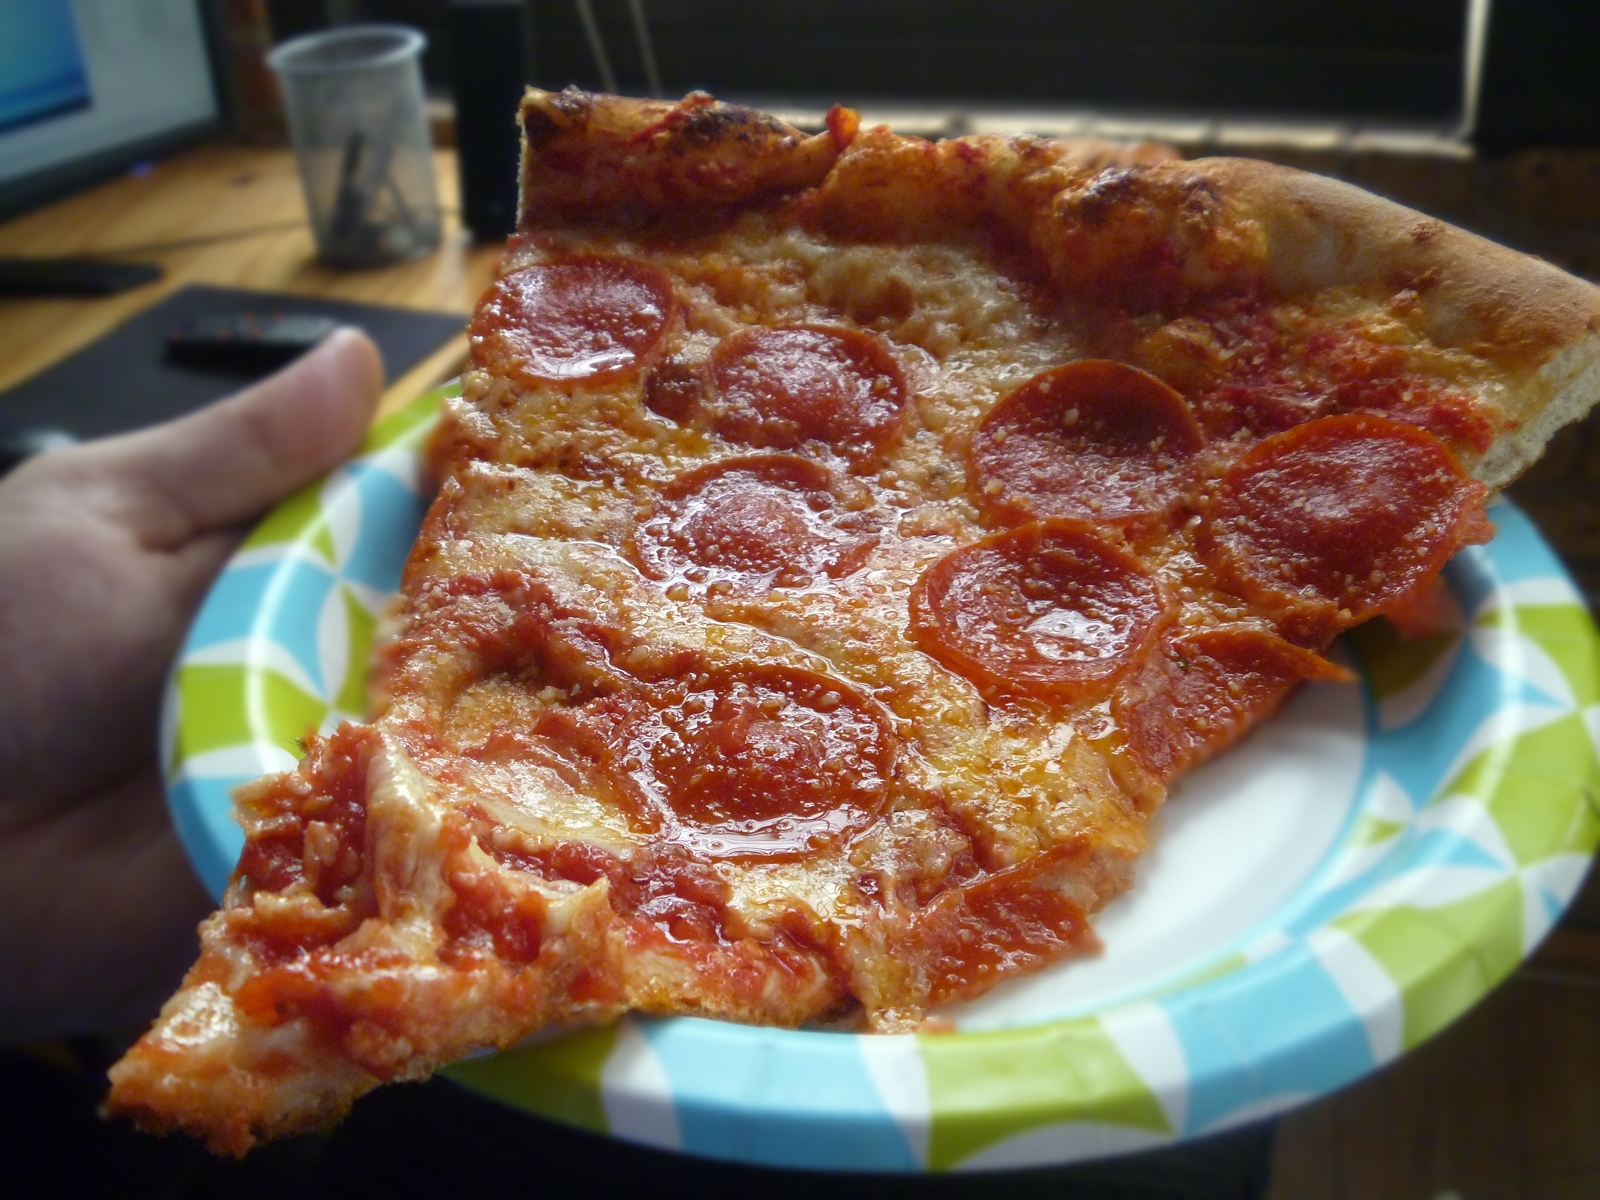 Real new york pizza